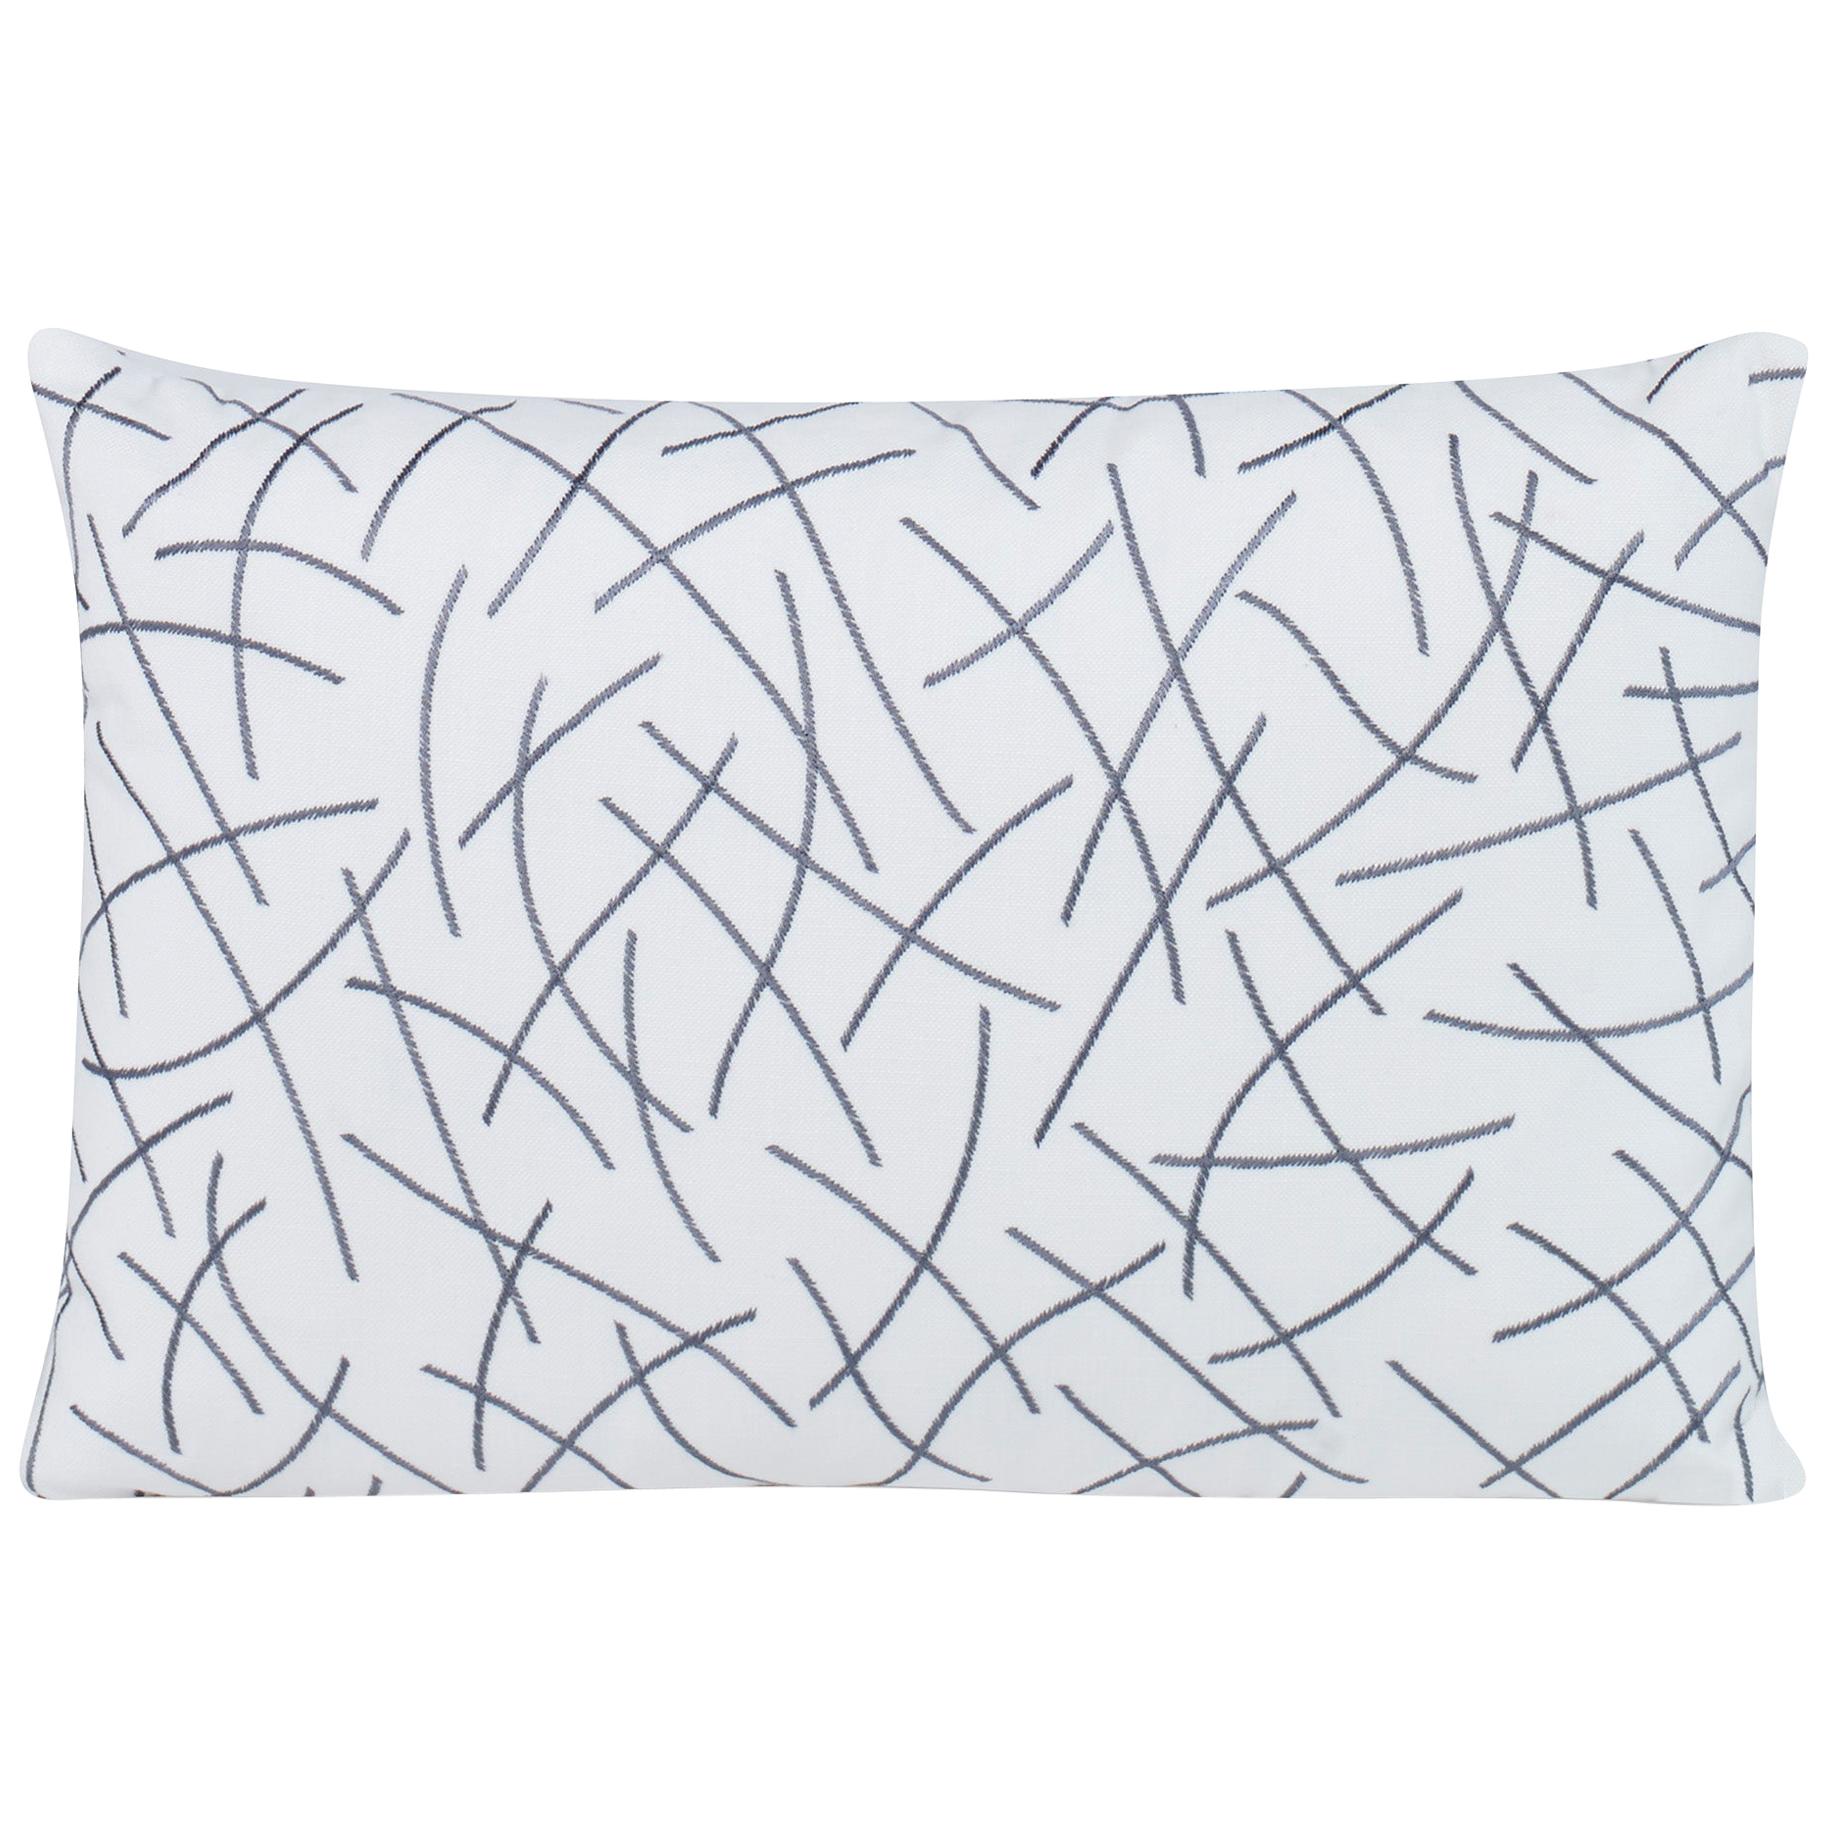 Stringart Pillow in White and Gray by Curatedkravet